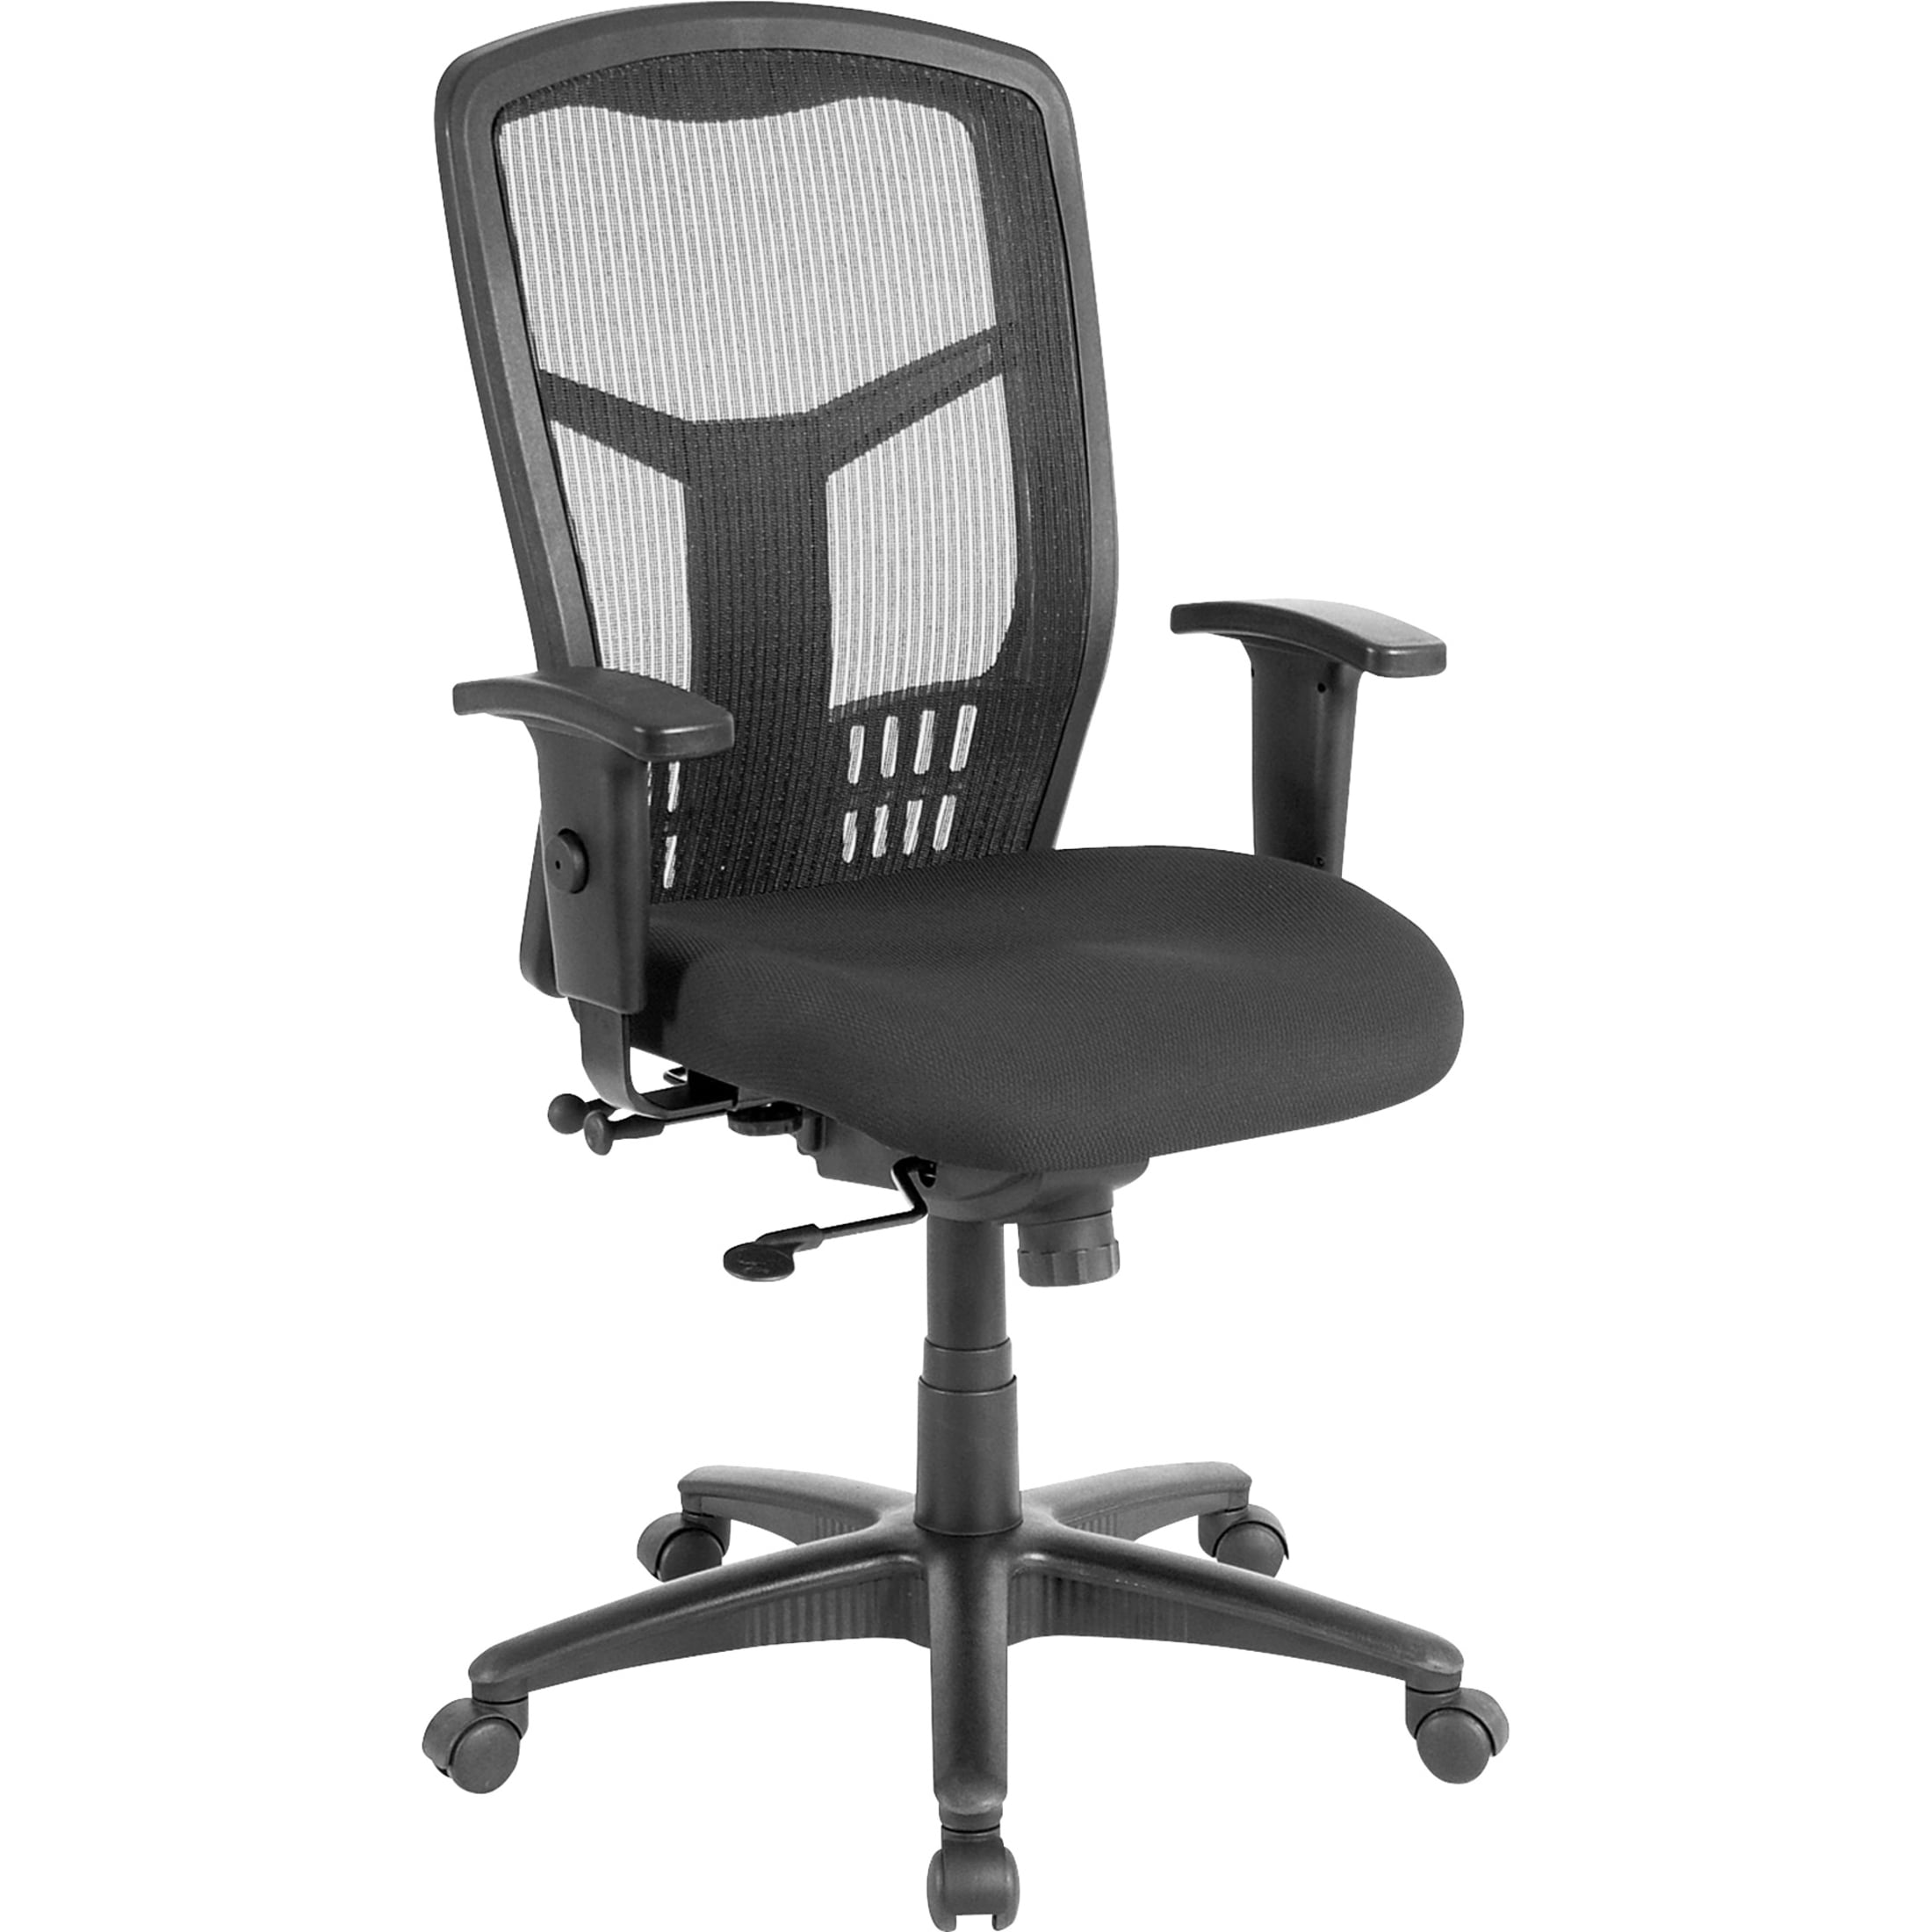 Lorell 86000 Series Executive Mesh Back Chair 86200 Llr86200 for sale online 